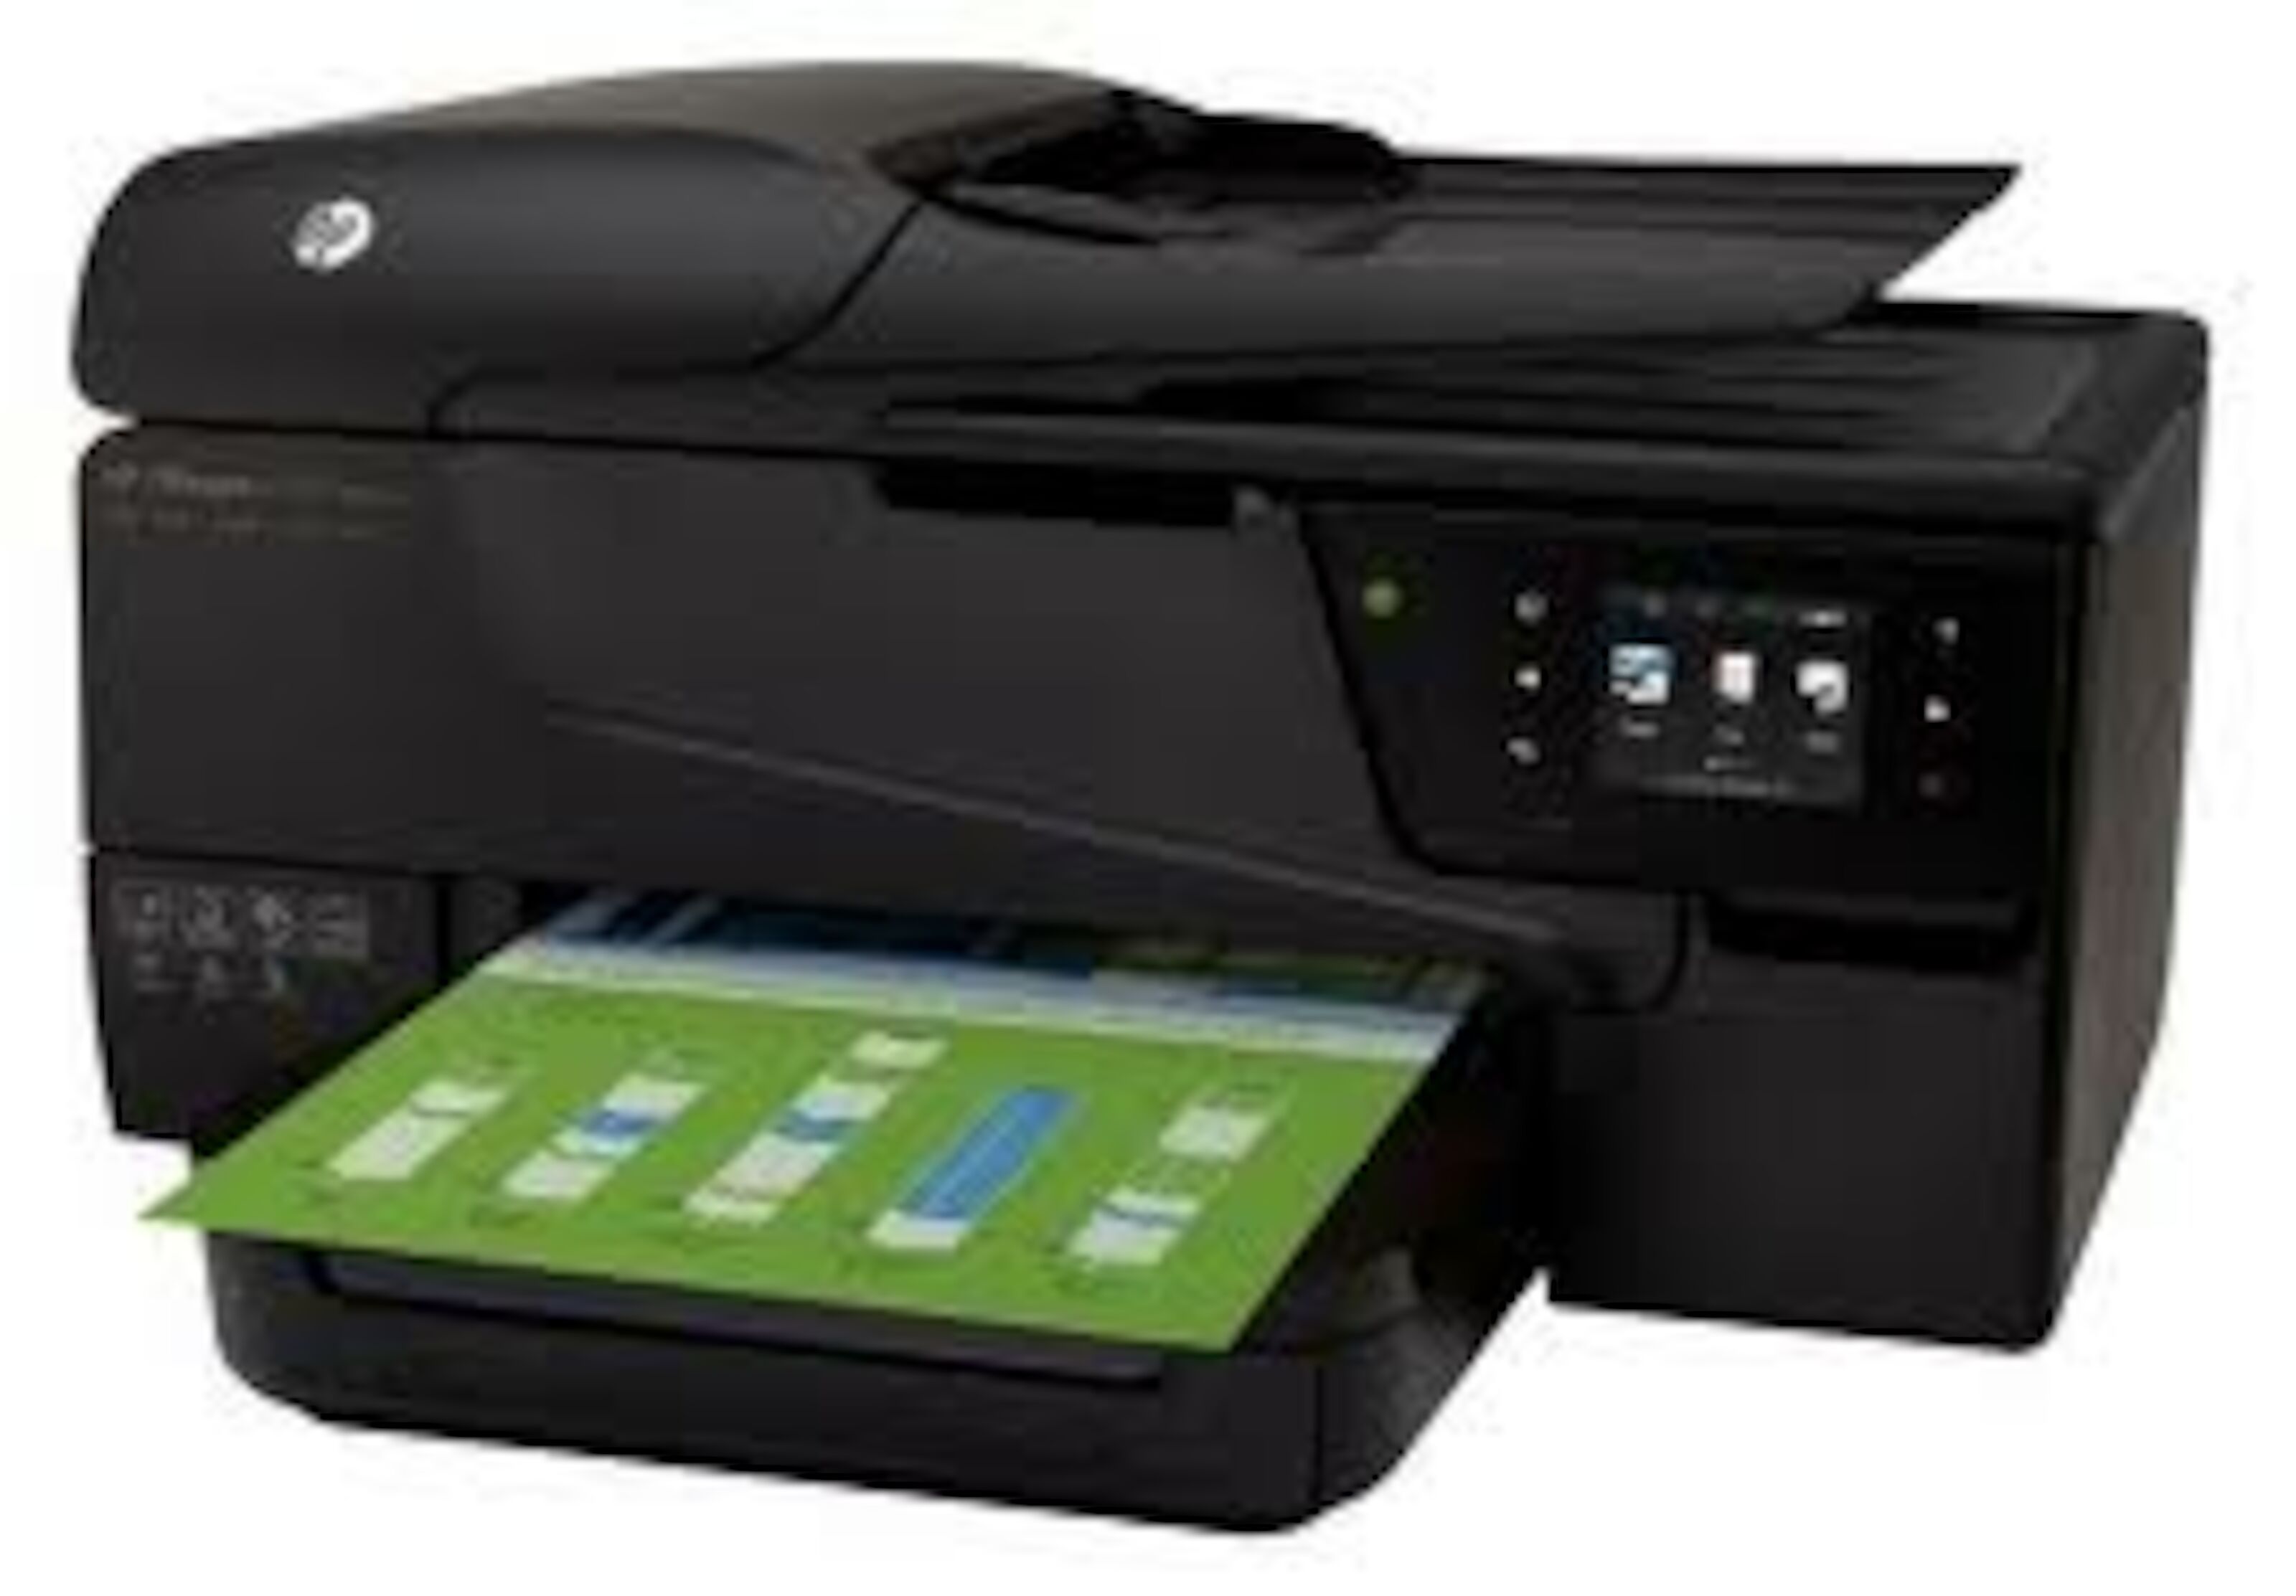 hp officejet pro 8600 driver only